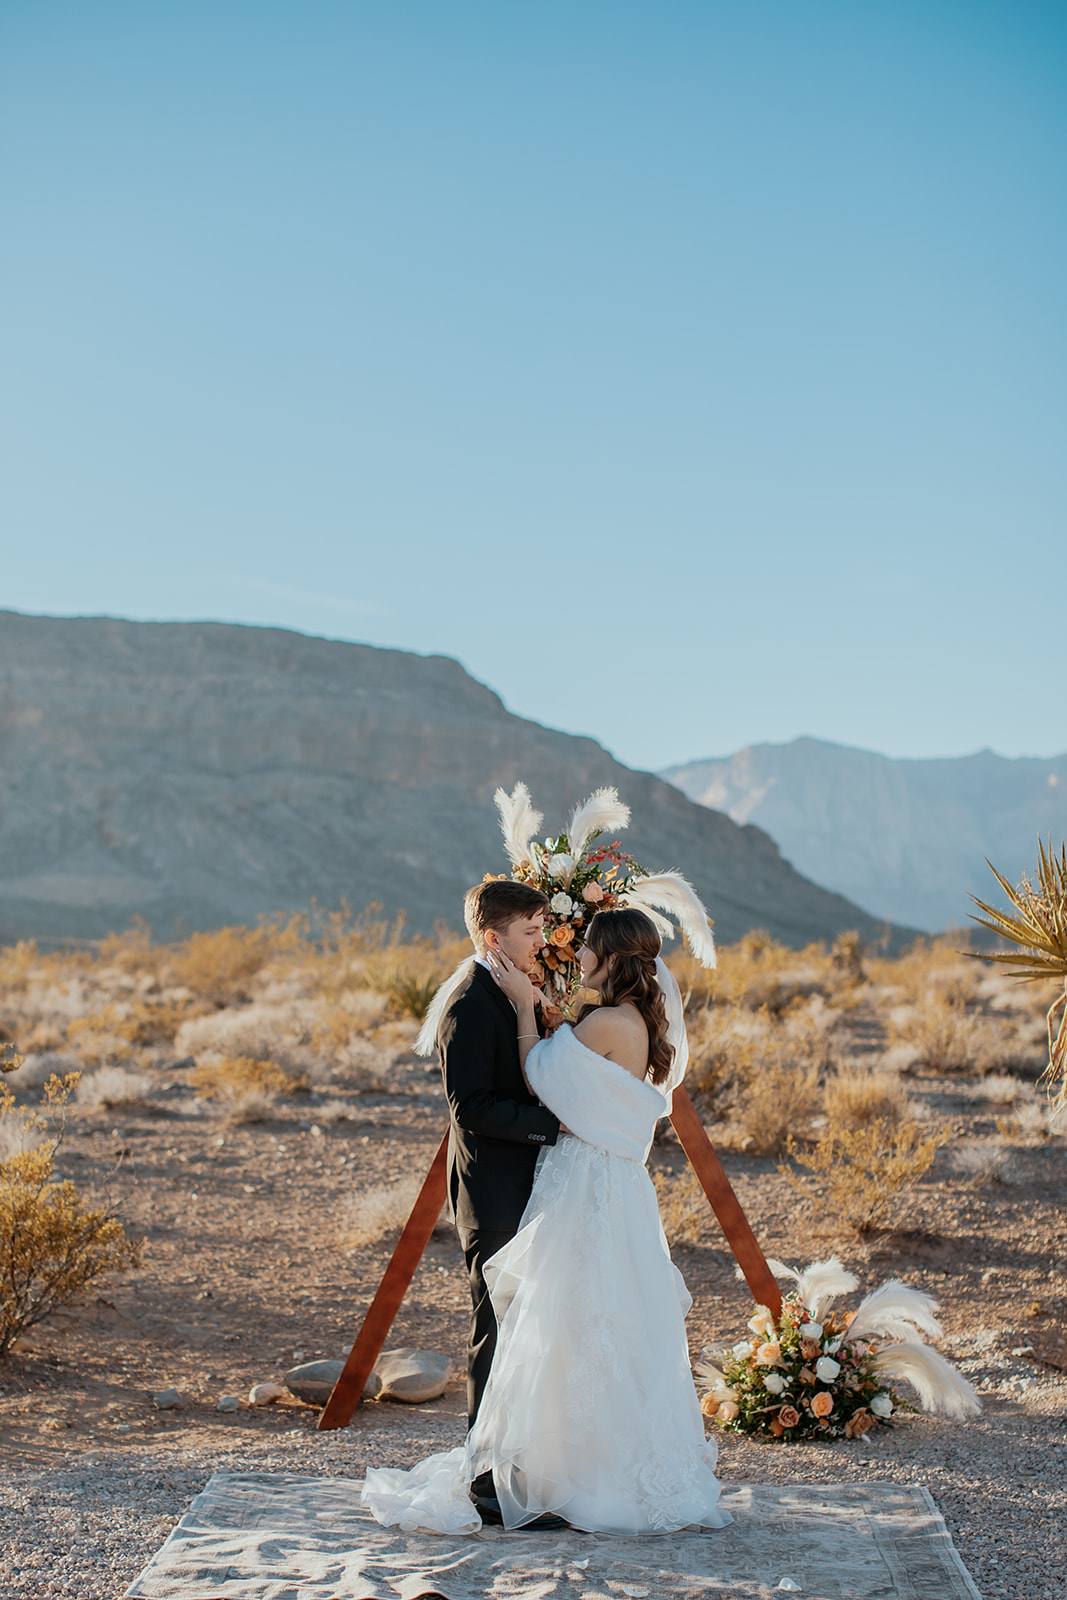 Bride and groom sharing an embrace in front of their wedding arch in the desert in Las Vegas